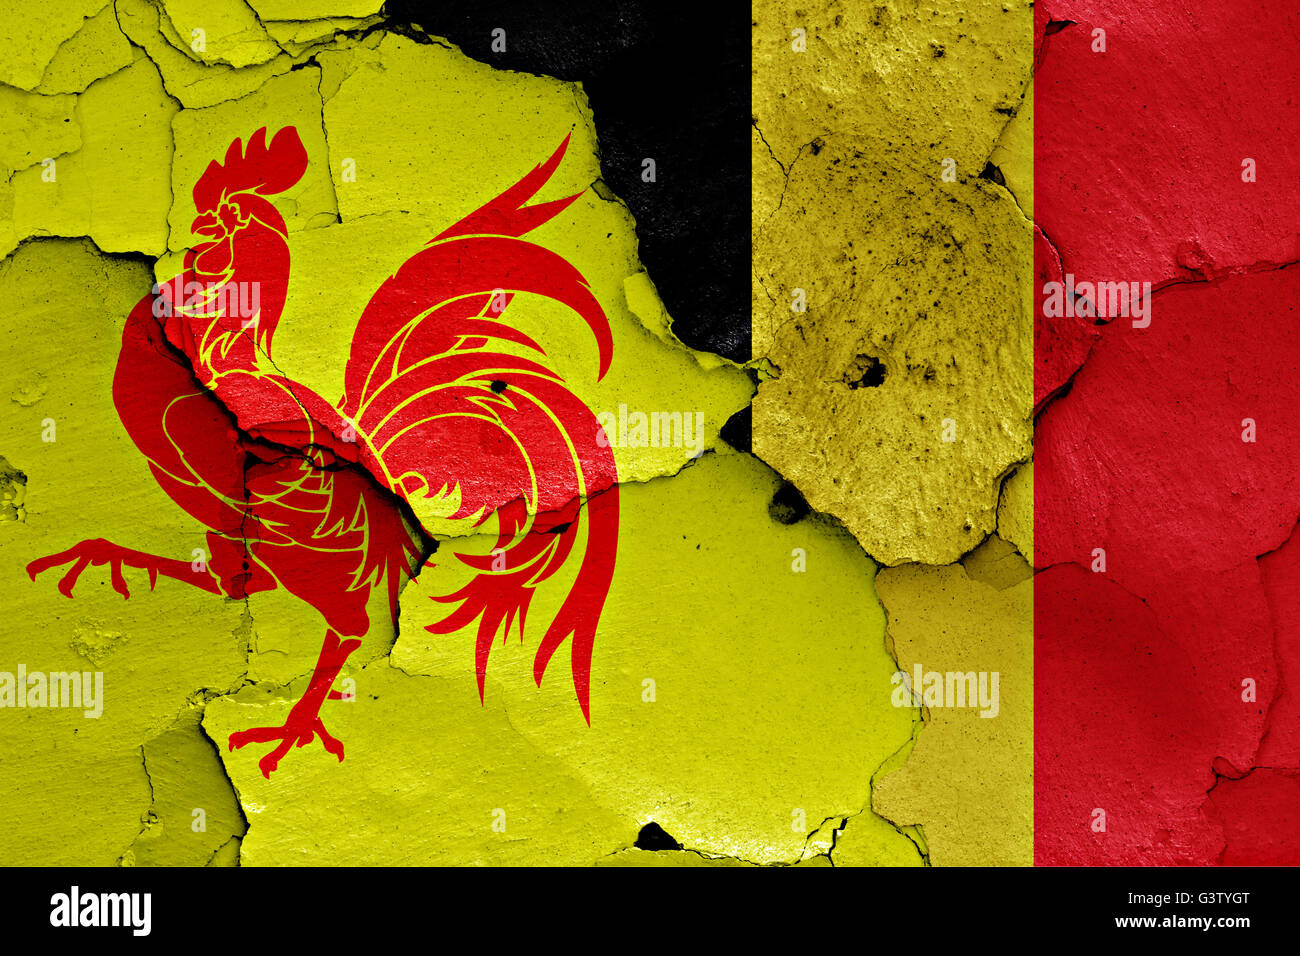 flags of Wallonia and Belgium painted on cracked wall Stock Photo